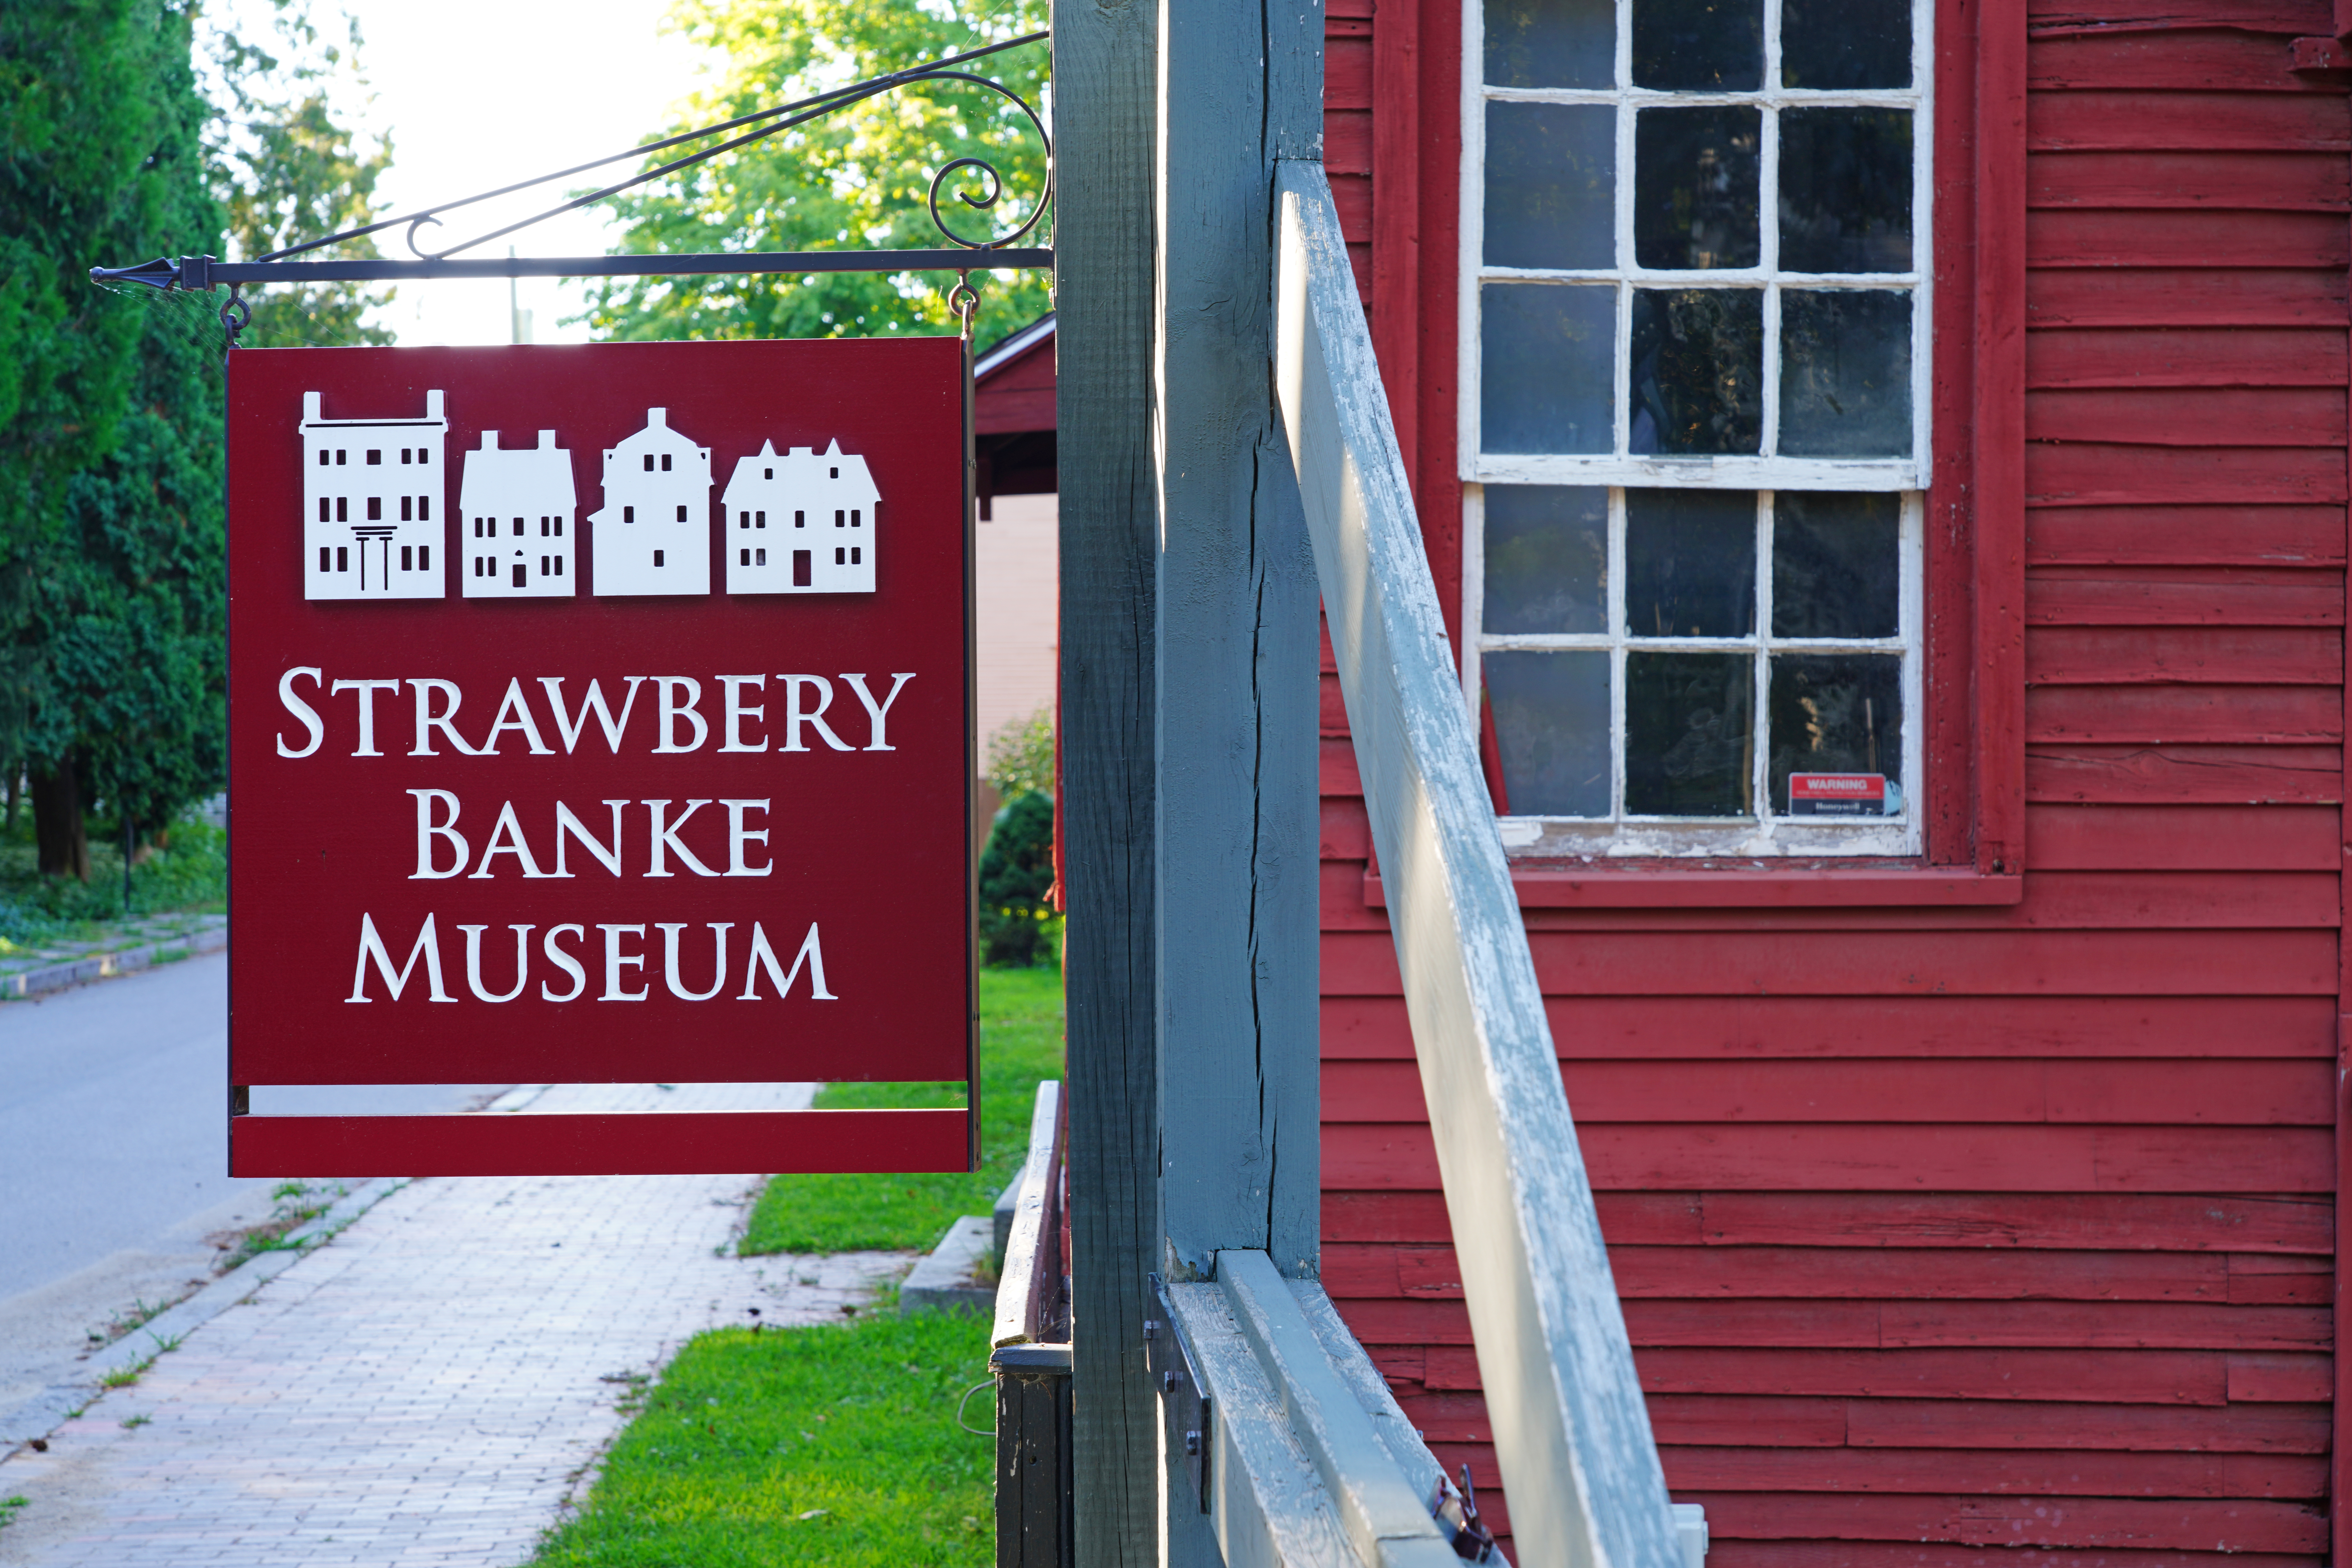 sign hanging outside the Strawbery Banke Museum